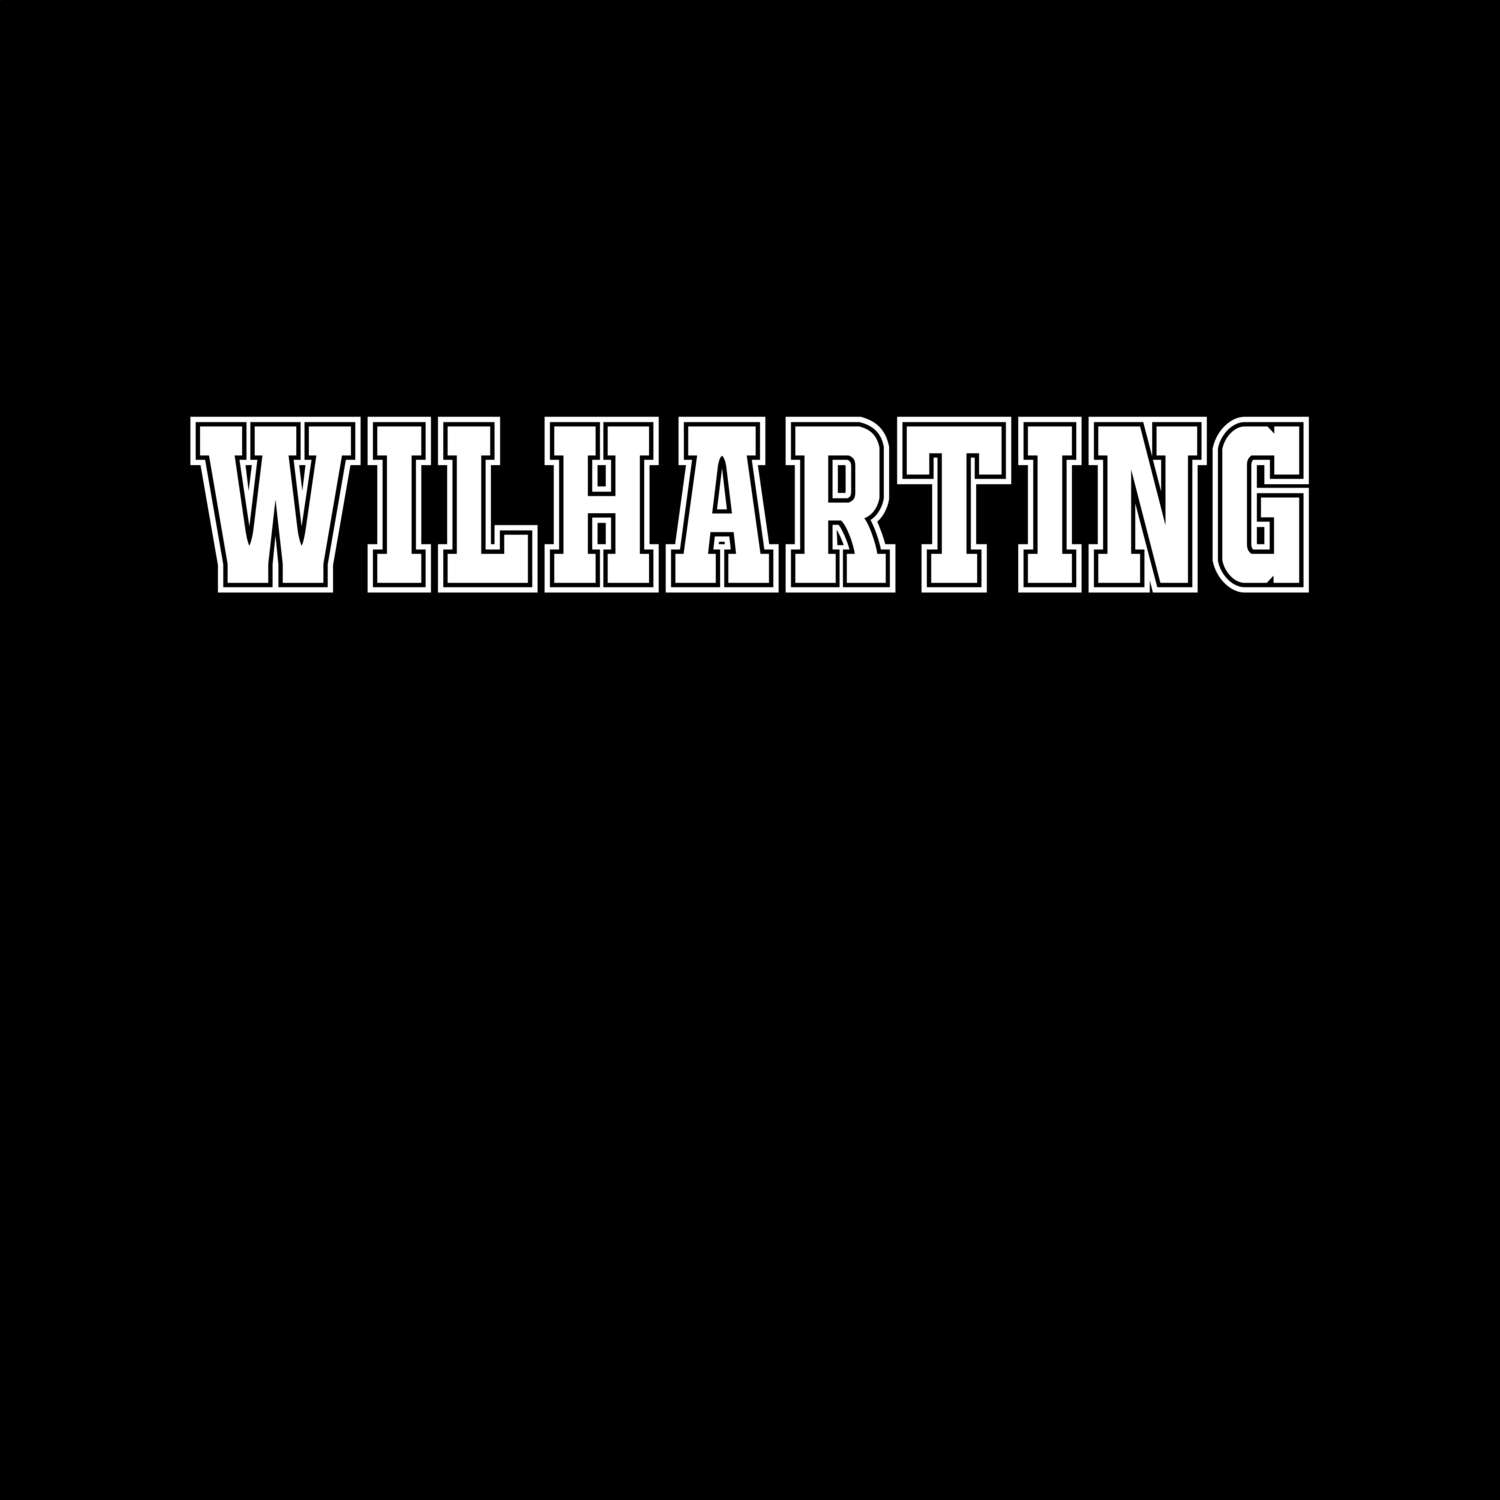 Wilharting T-Shirt »Classic«